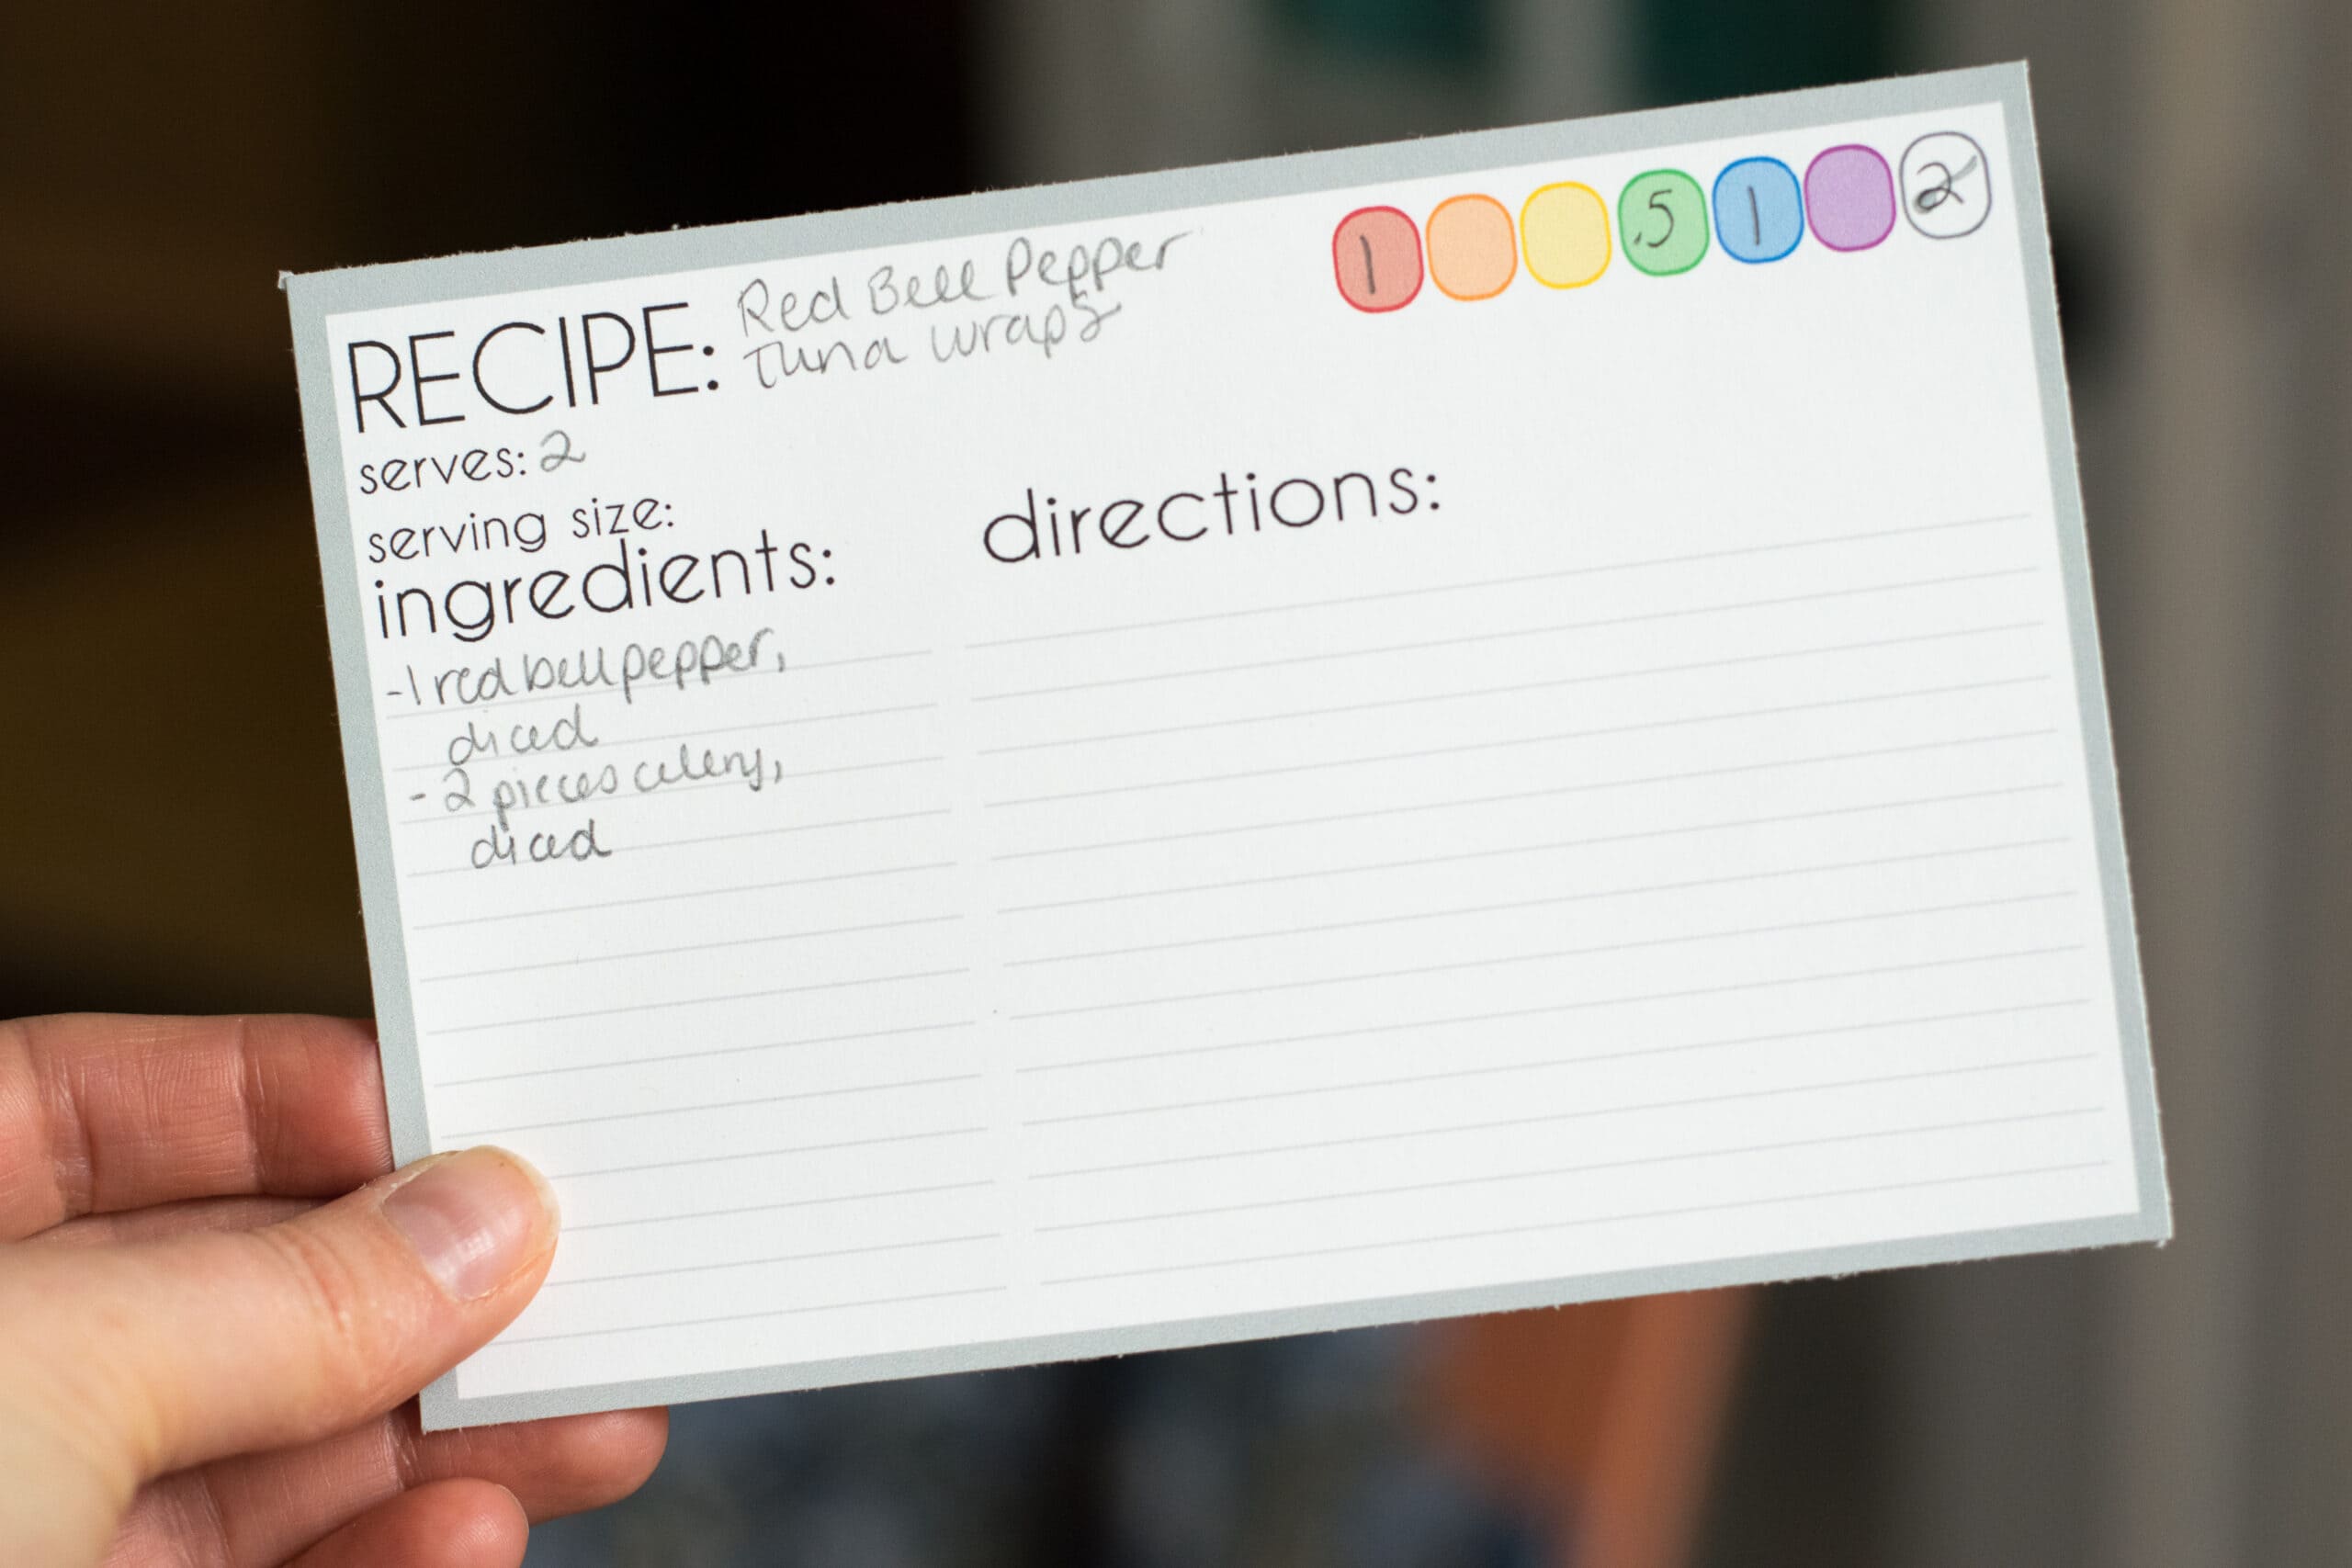 These 21 Day Fix planners & printables are great tools for starting your diet off right.  